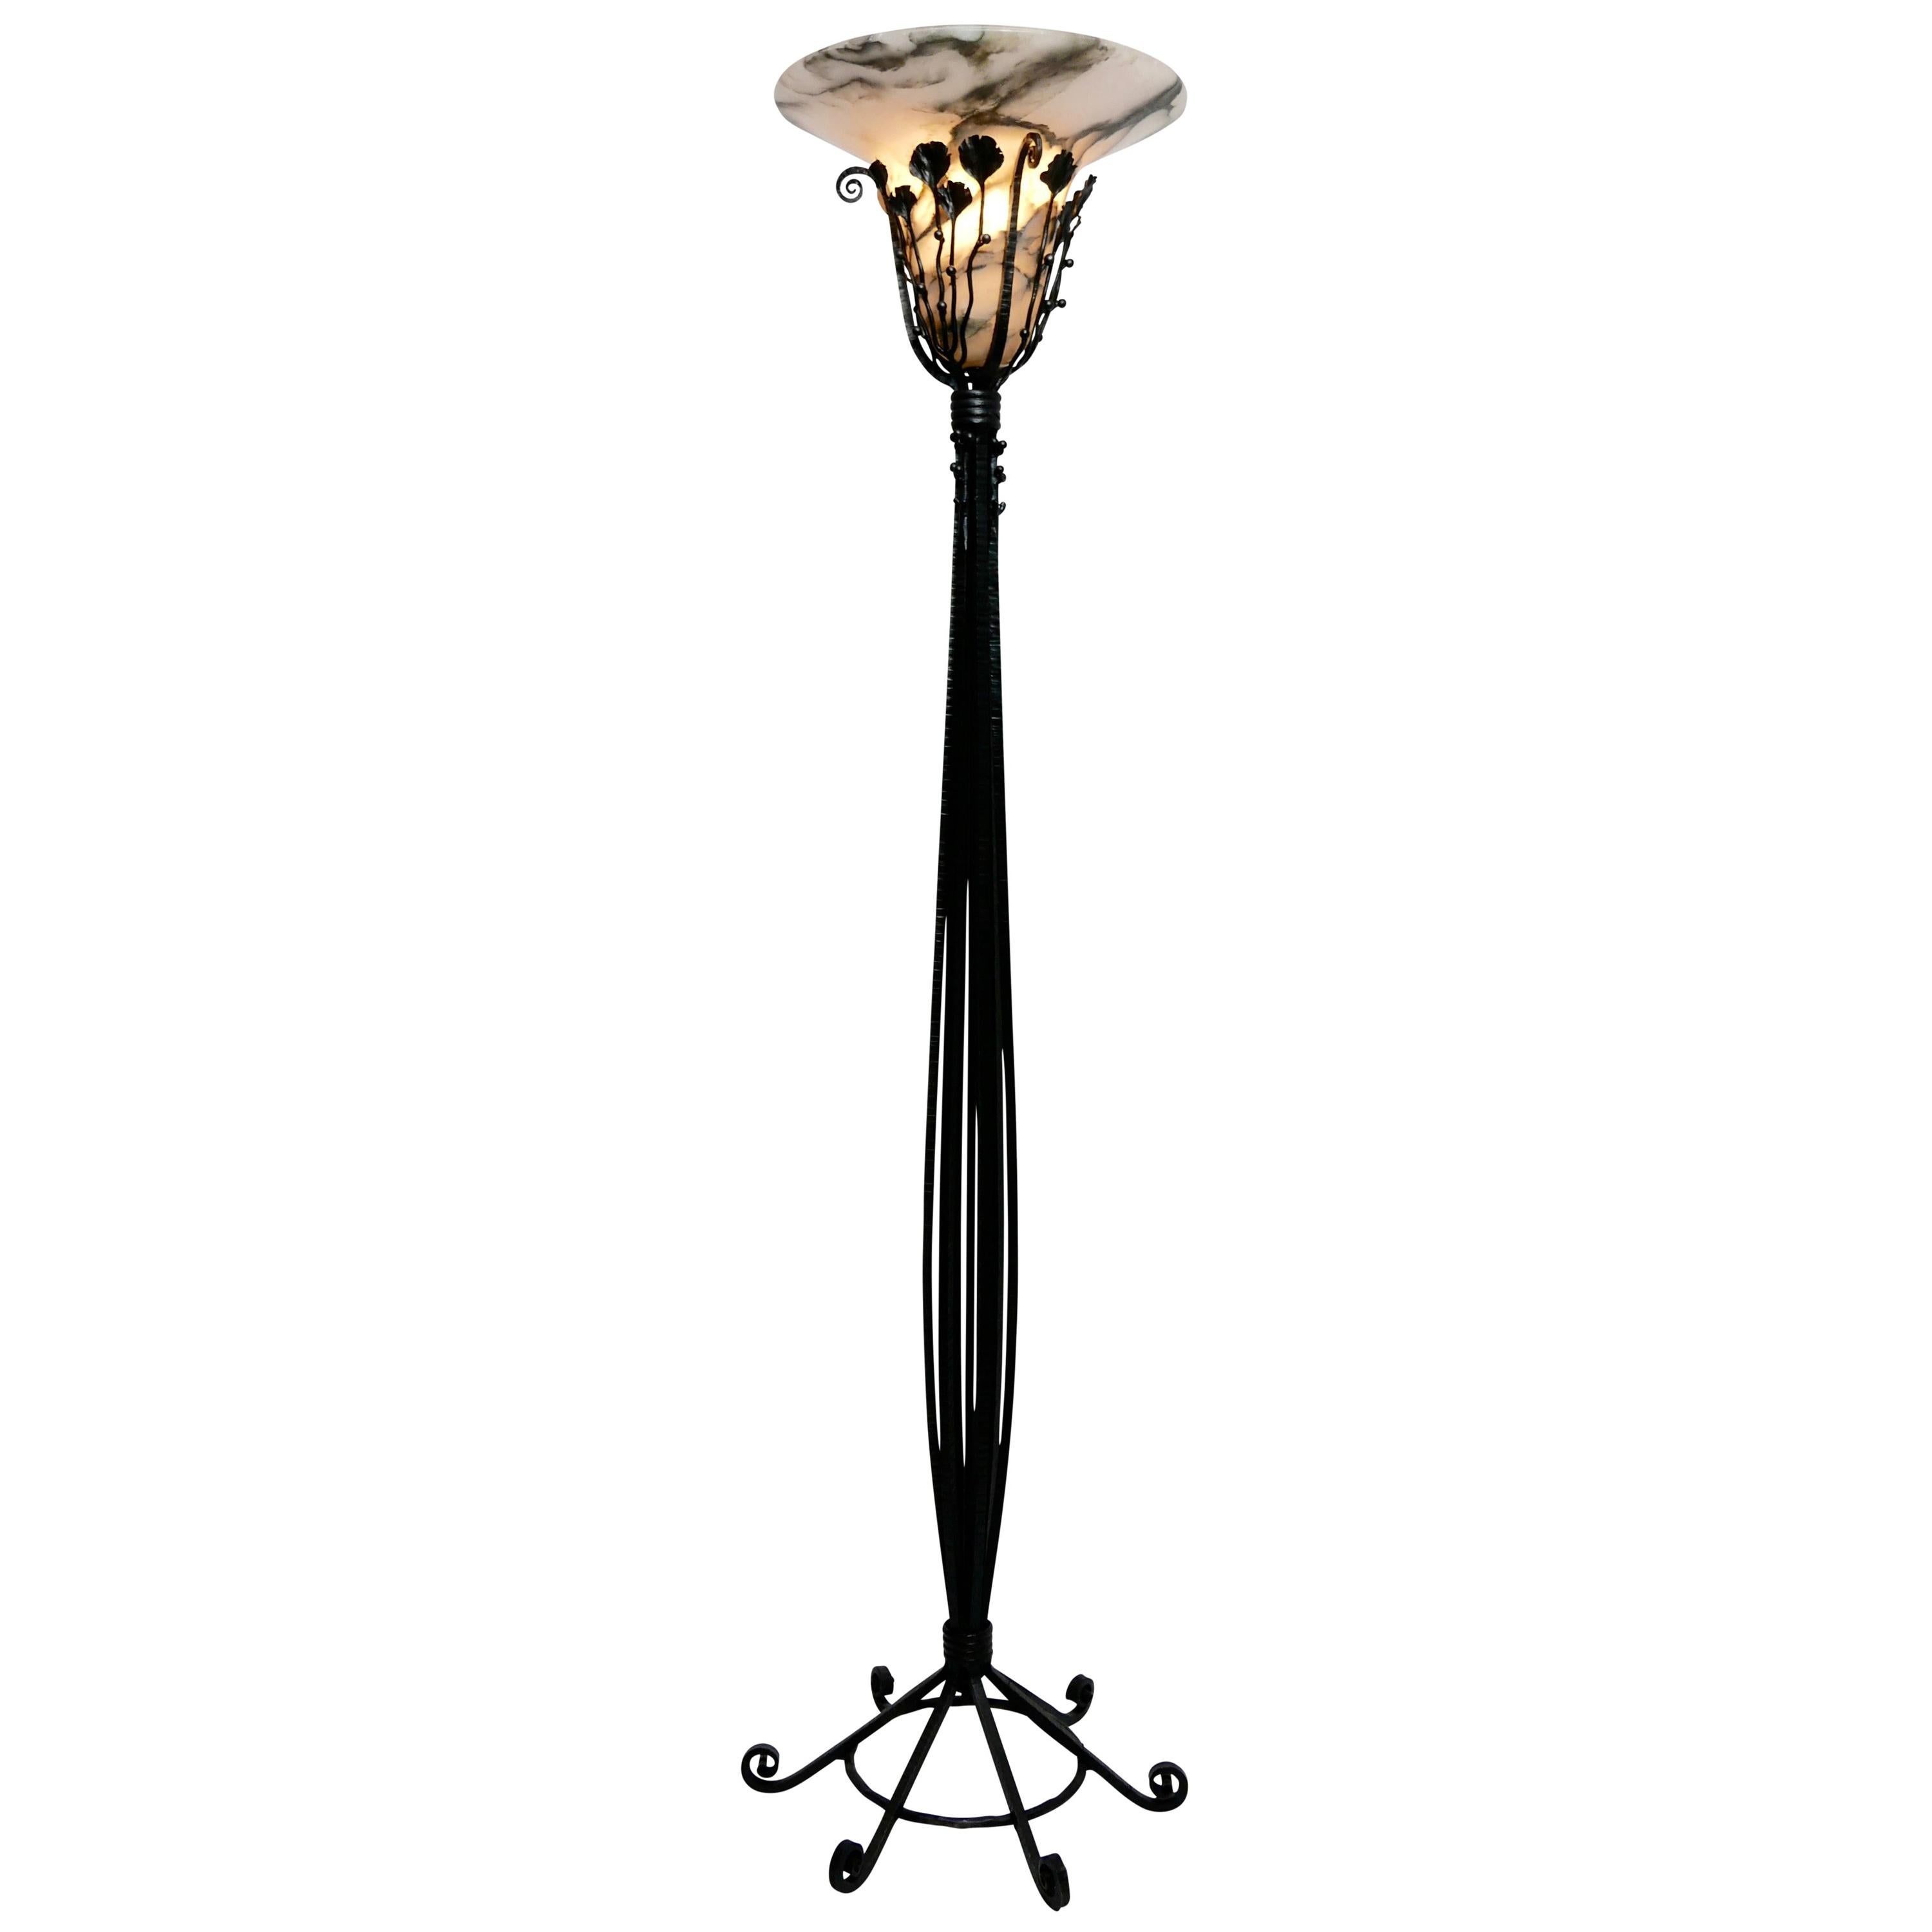 Art Deco Wrought Iron Floor Lamp with Alabaster Shade, French, circa 1920 For Sale